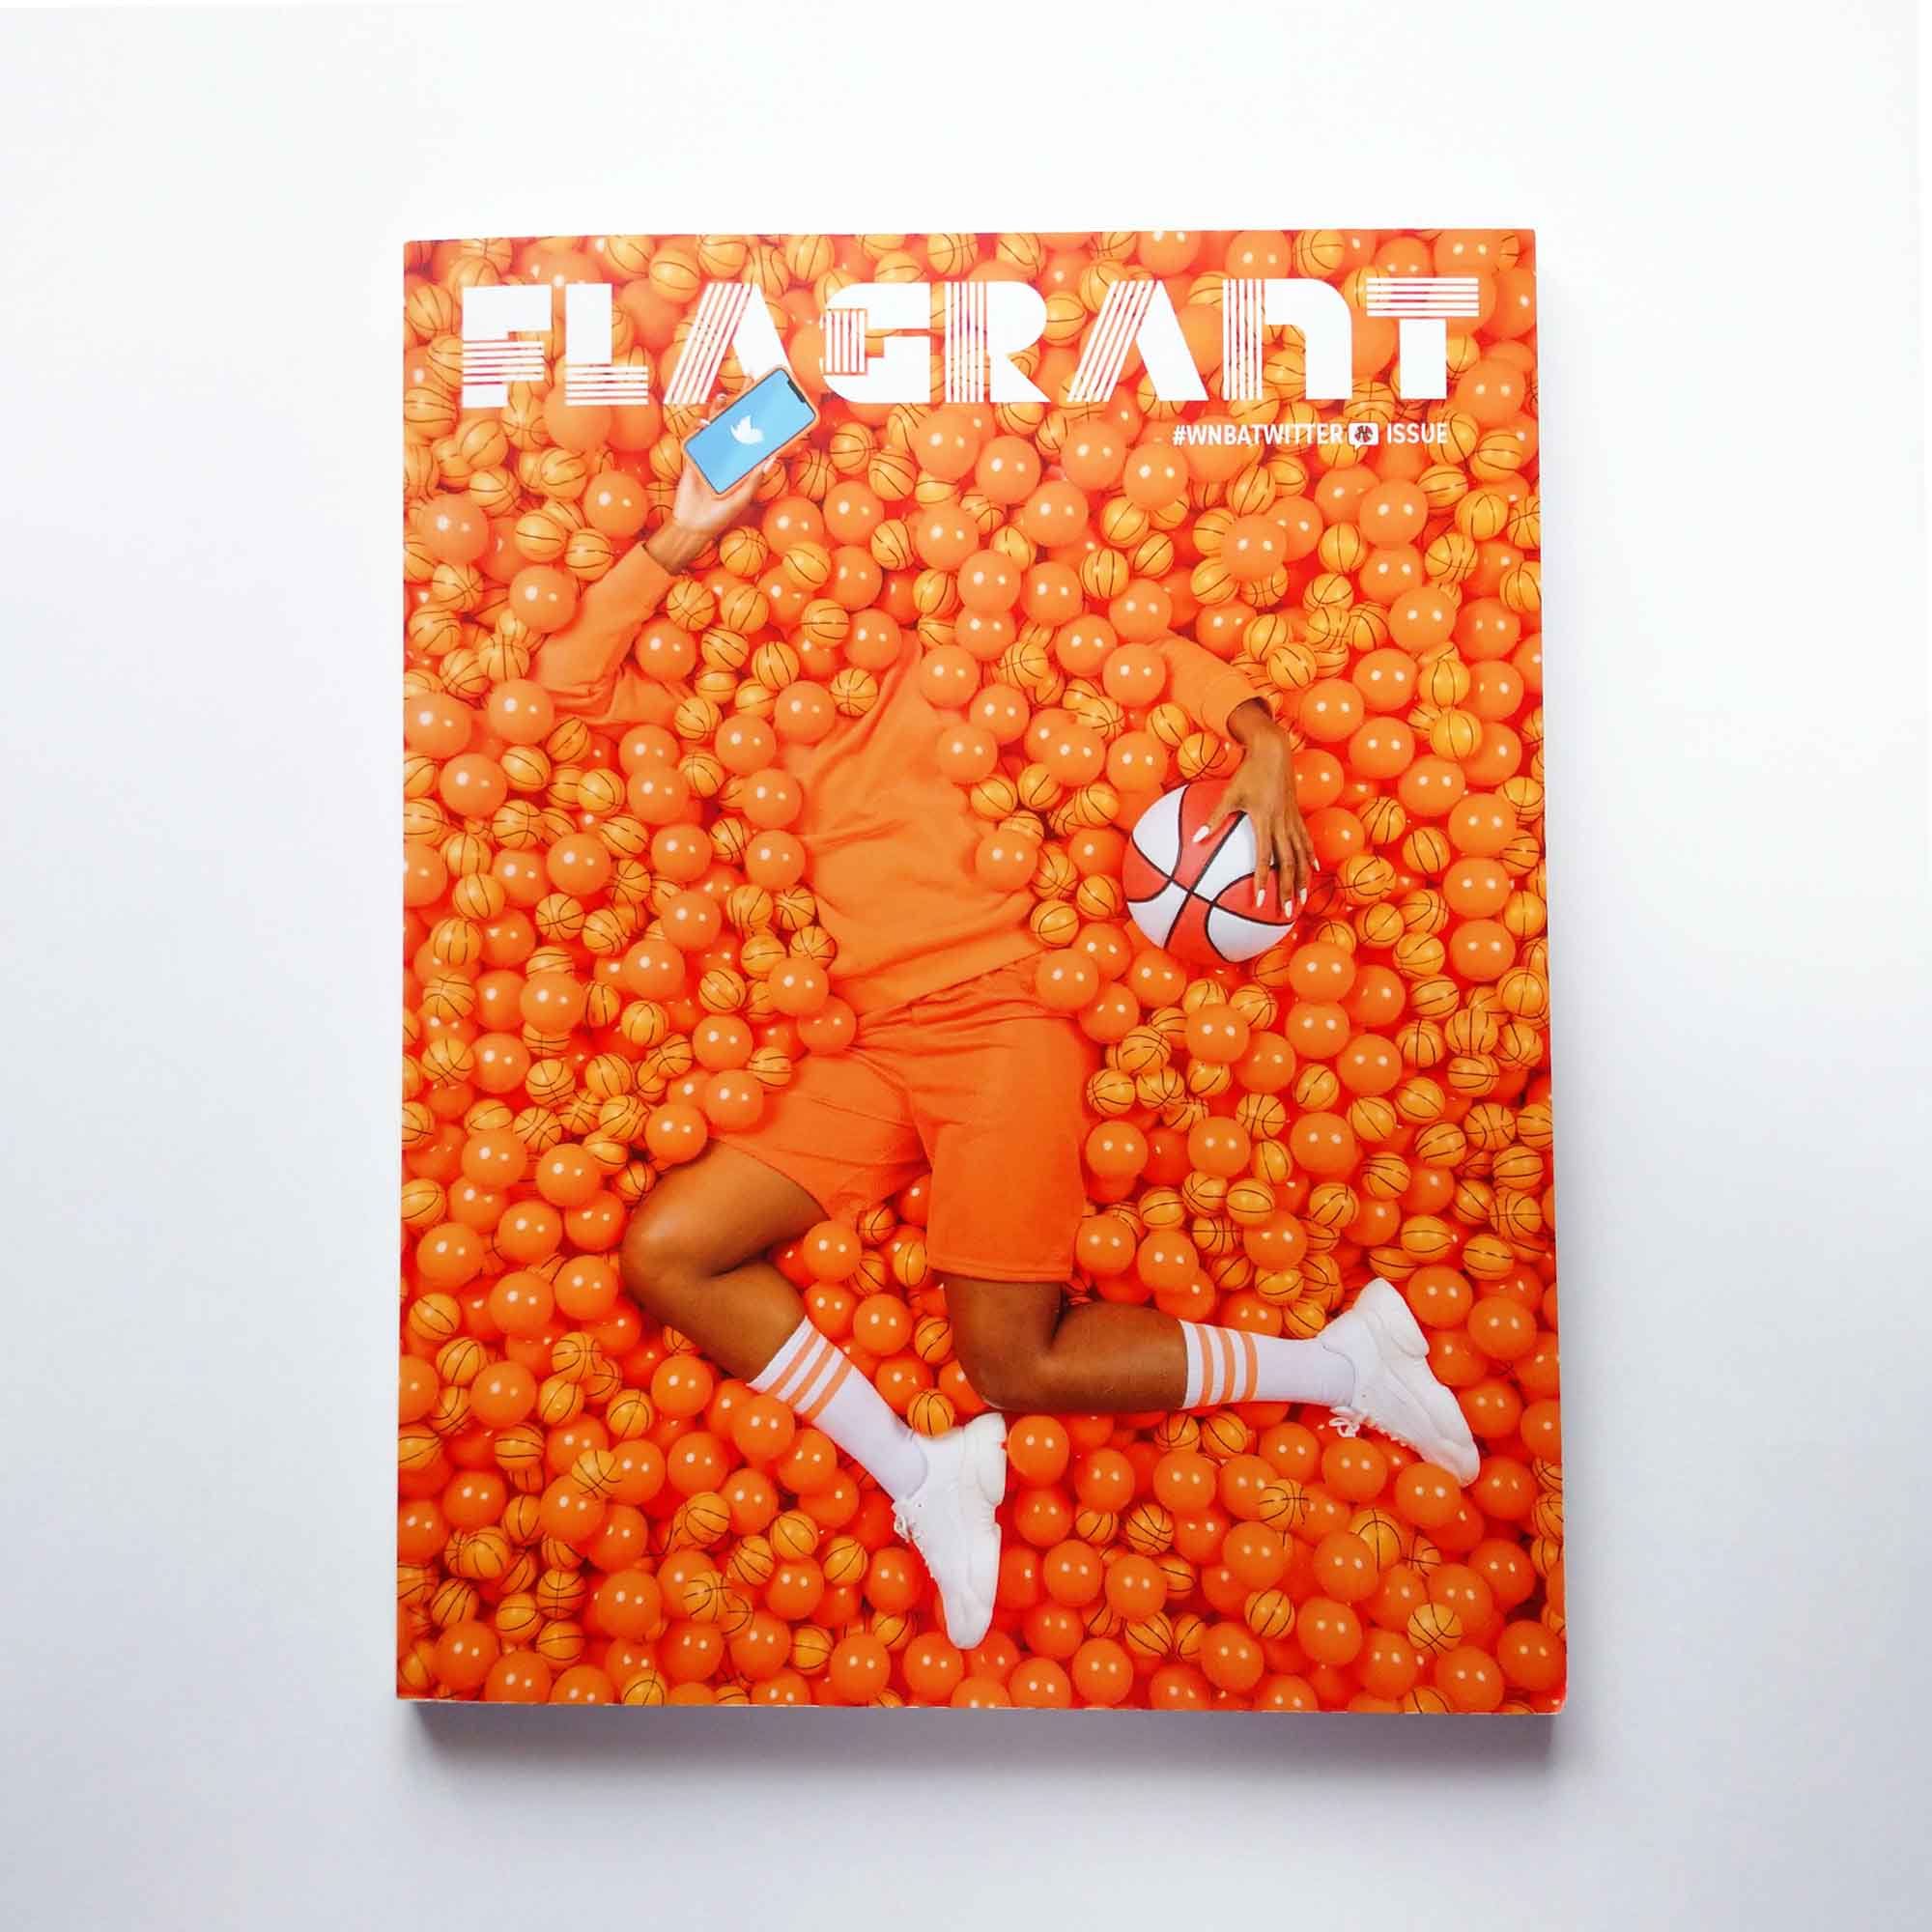 FLAGRANT issue 03